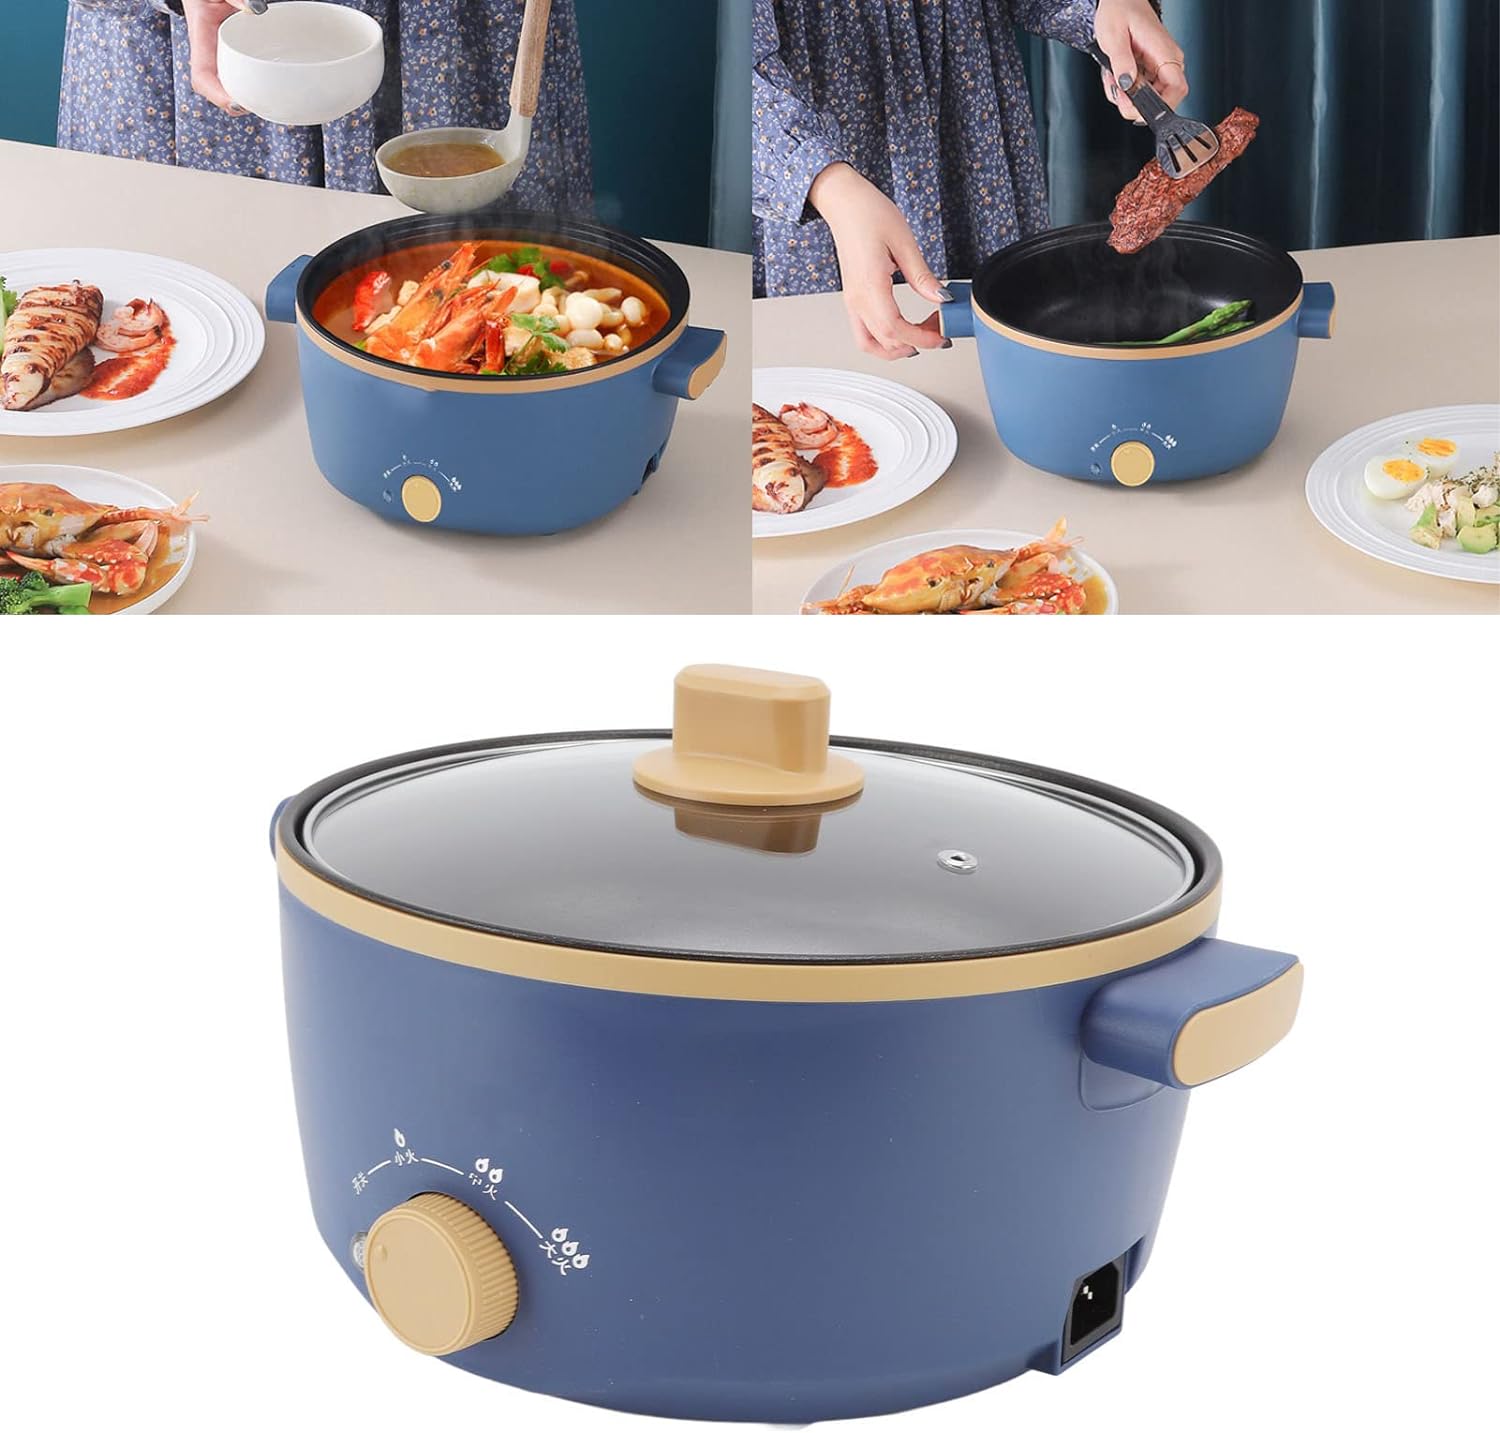 TOPINCN Electric Hot Pot, Mini Multifunction Small Kitchen Appliances Hot Pots Household Nonstick Electric Frying Pan for Roast Noodles Pasta Ramen 800W 2.5L 3 Speed - Amazing Gadgets Outlet